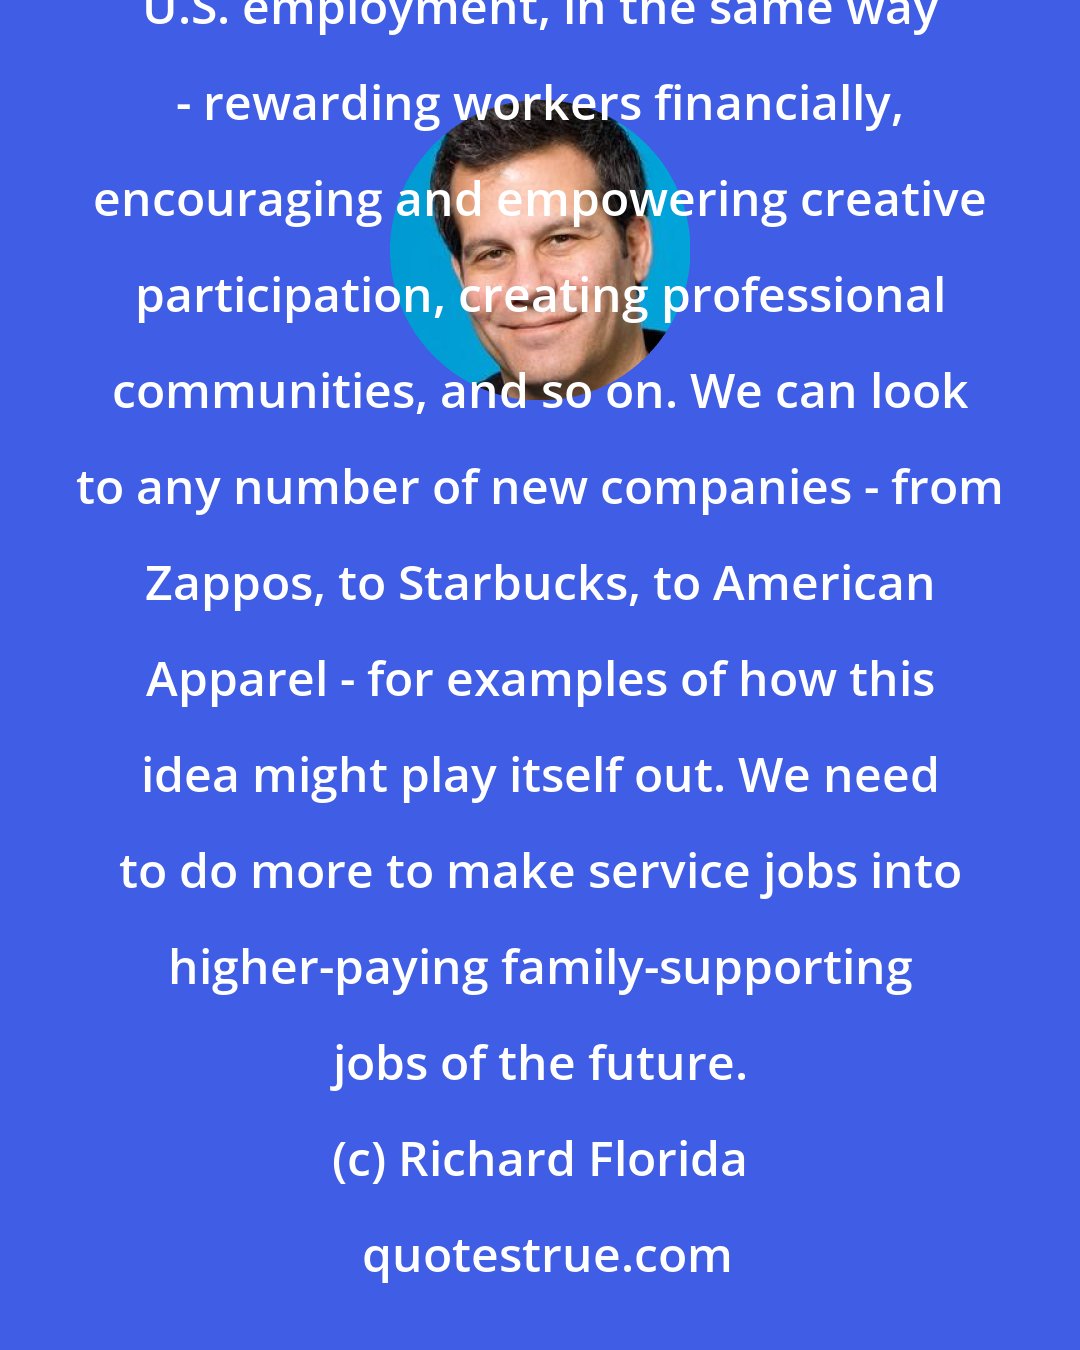 Richard Florida: We need to find ways to transform the more than 60 million service jobs, which make up 45 percent of U.S. employment, in the same way - rewarding workers financially, encouraging and empowering creative participation, creating professional communities, and so on. We can look to any number of new companies - from Zappos, to Starbucks, to American Apparel - for examples of how this idea might play itself out. We need to do more to make service jobs into higher-paying family-supporting jobs of the future.